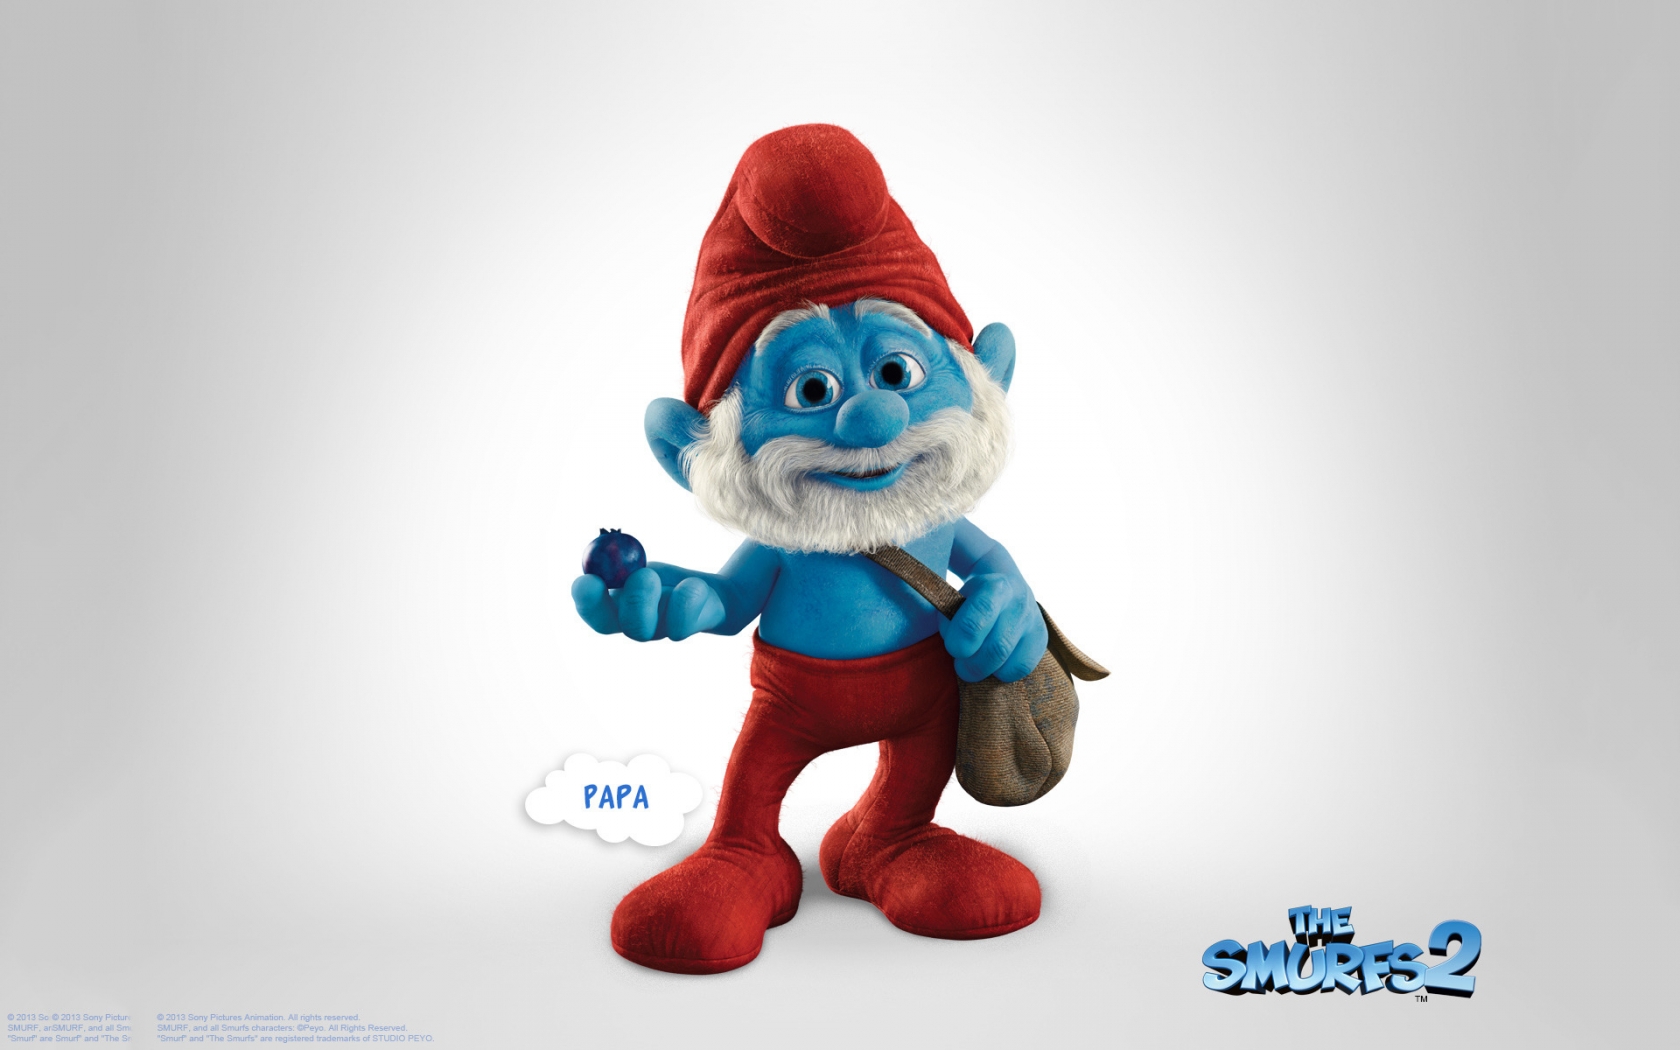 Papa The Smurfs 2 for 1680 x 1050 widescreen resolution